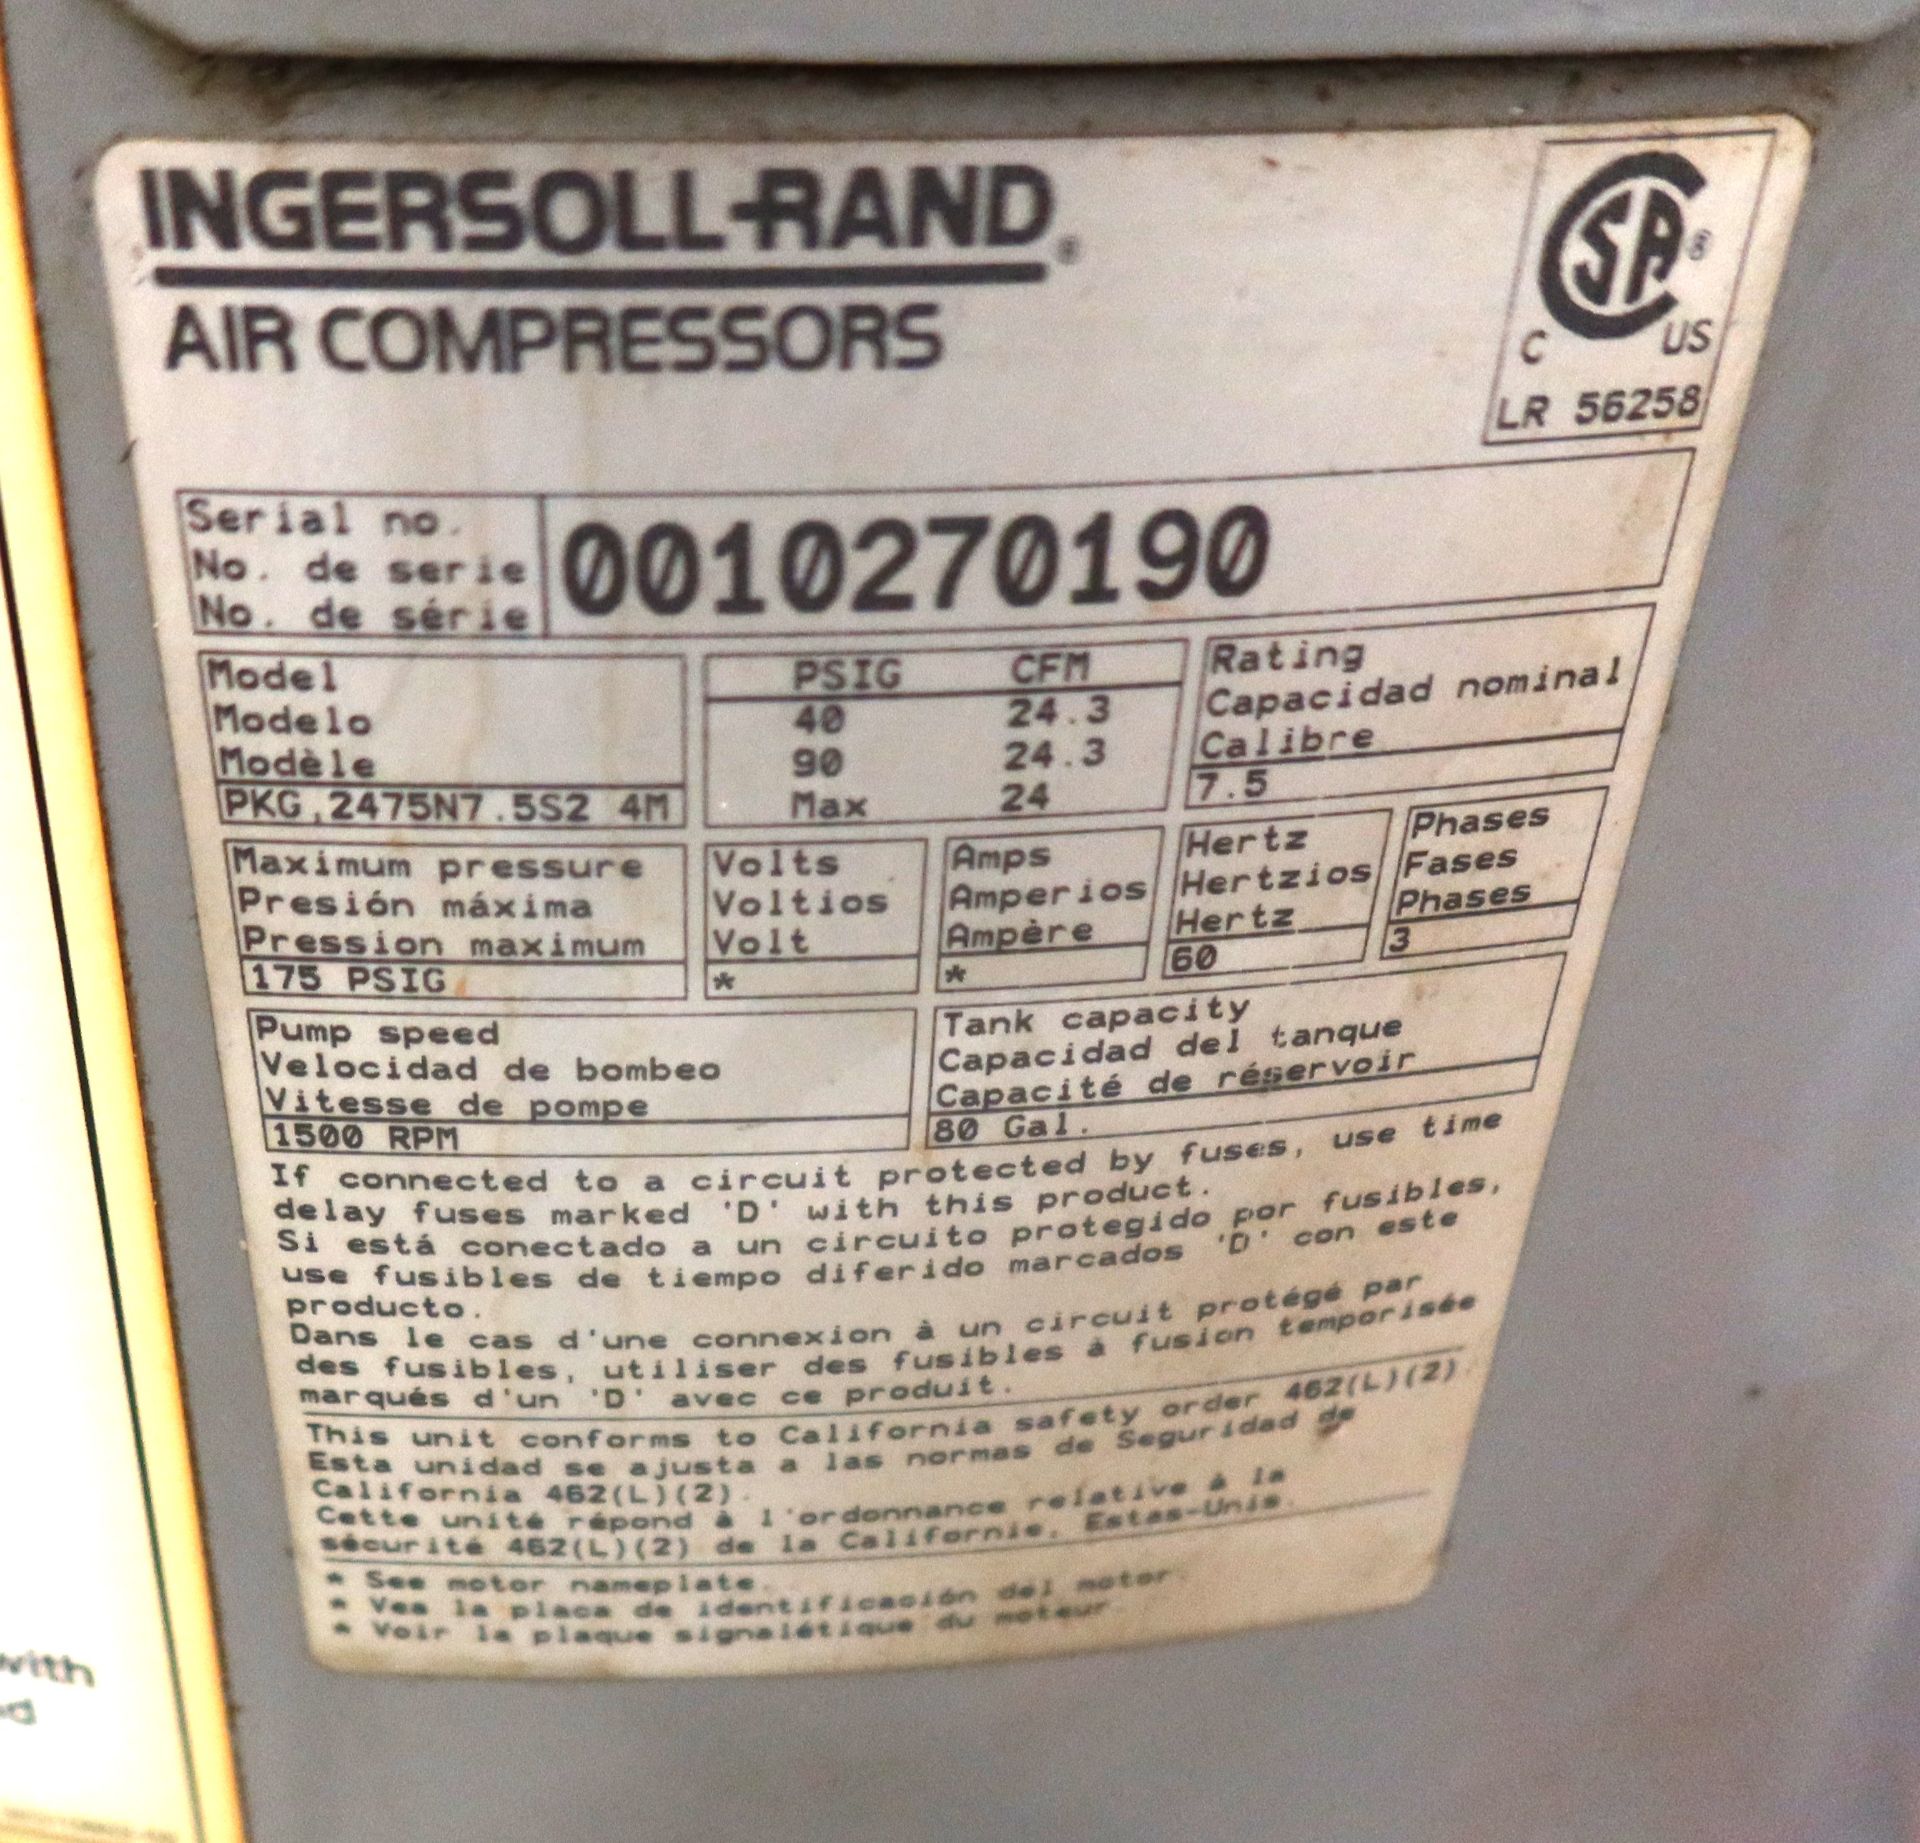 Ingersoll Rand 175psi Air Compressor Model T30 - Image 2 of 2